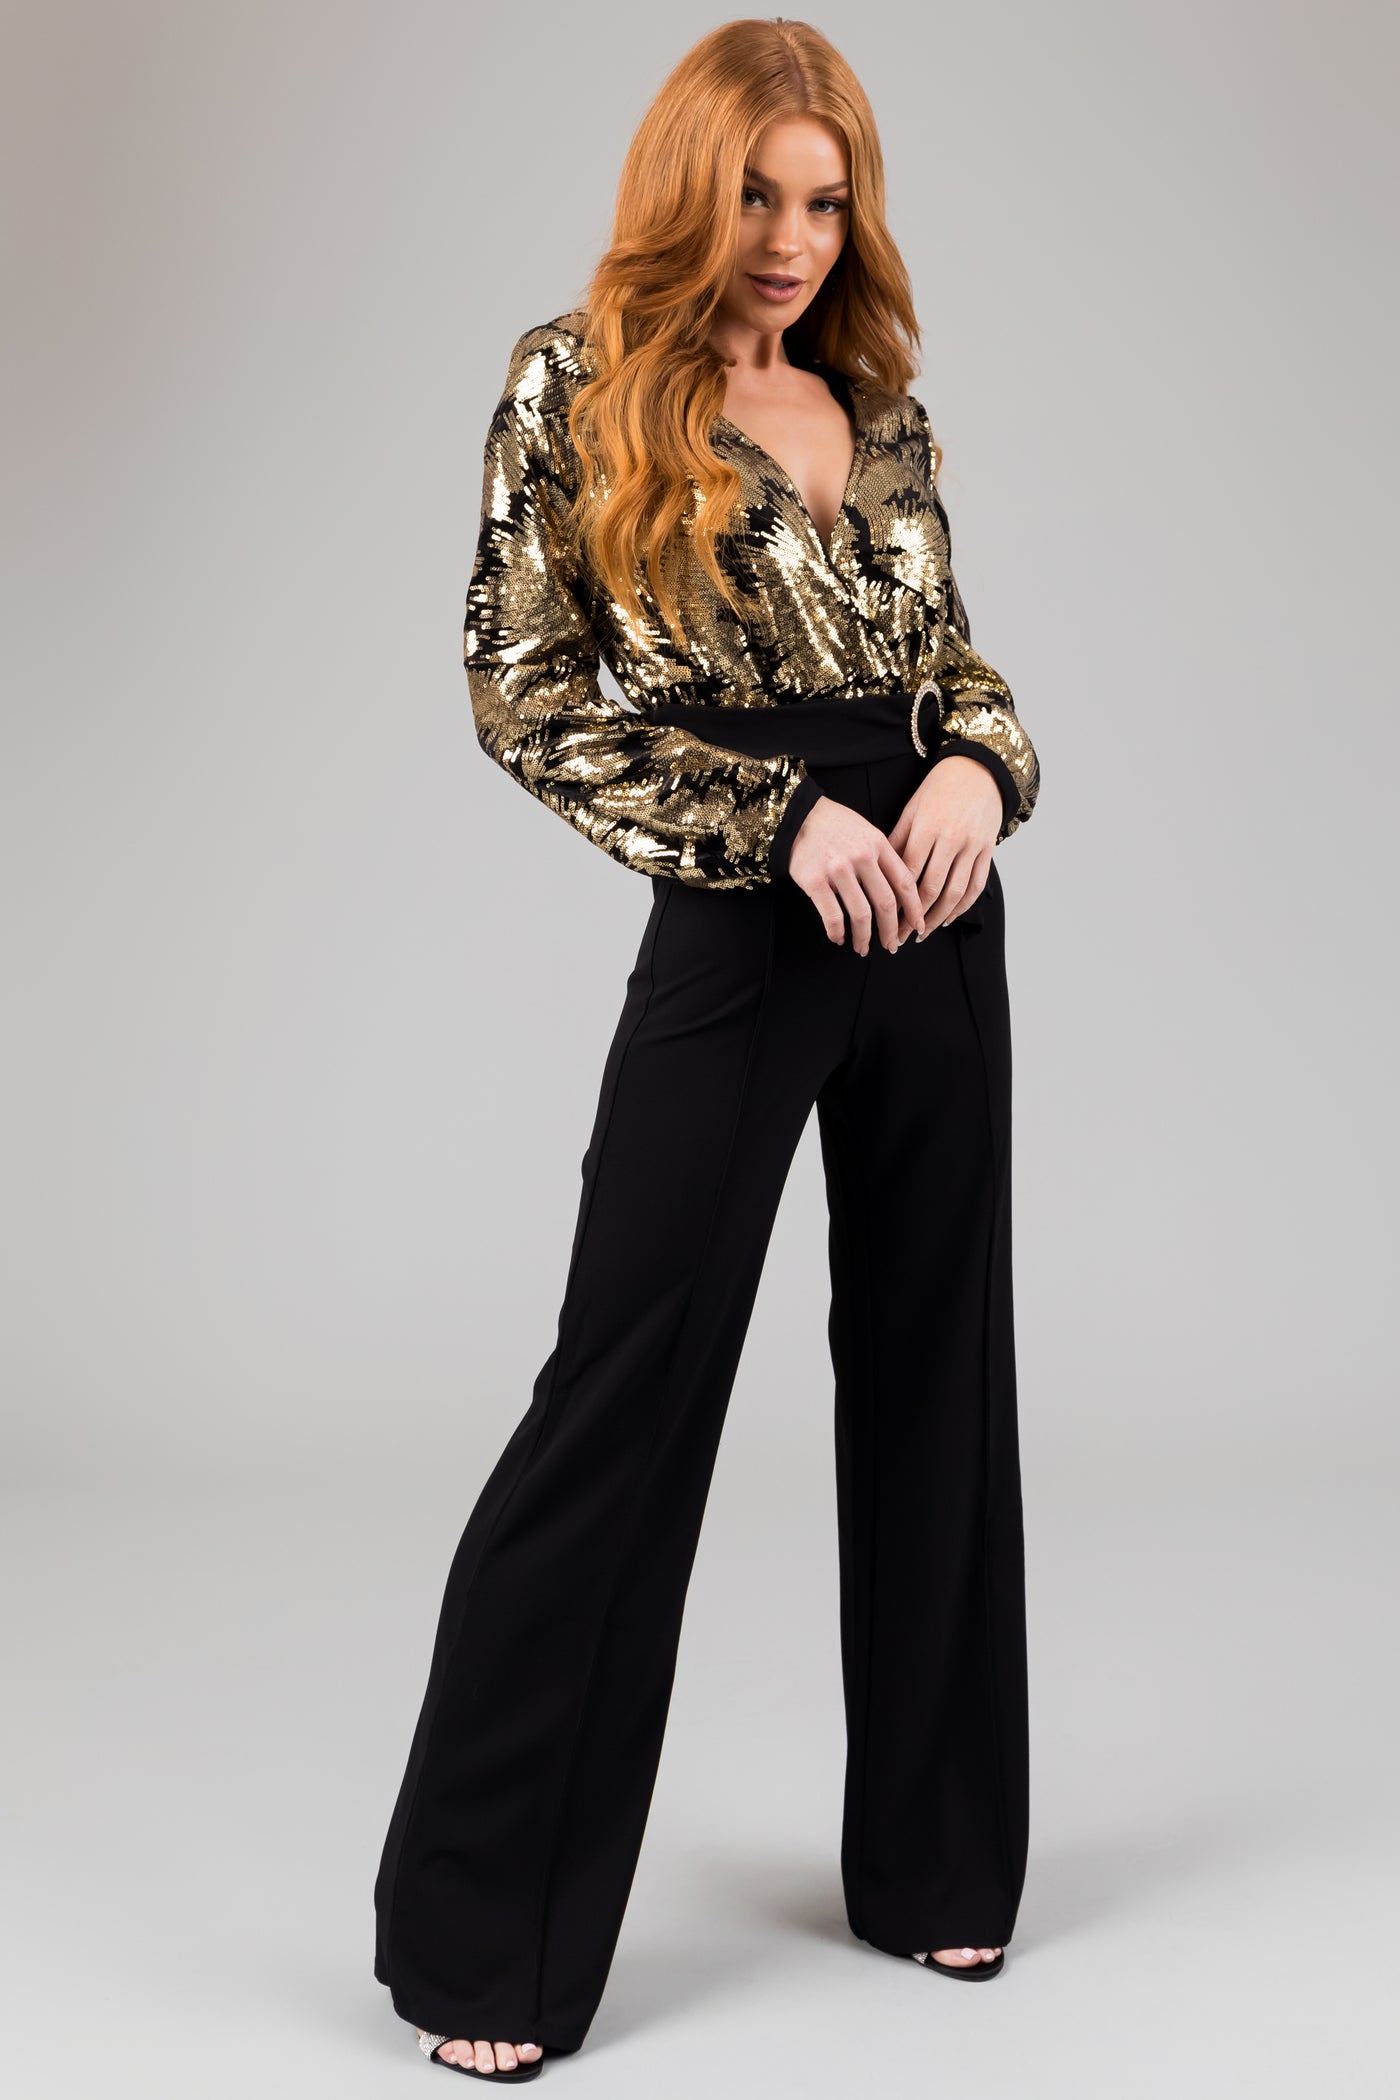 Style Pantry, Plunging Neck Bodysuit + Sequin High Waist Pants - gold and black  sequin stripe pan…